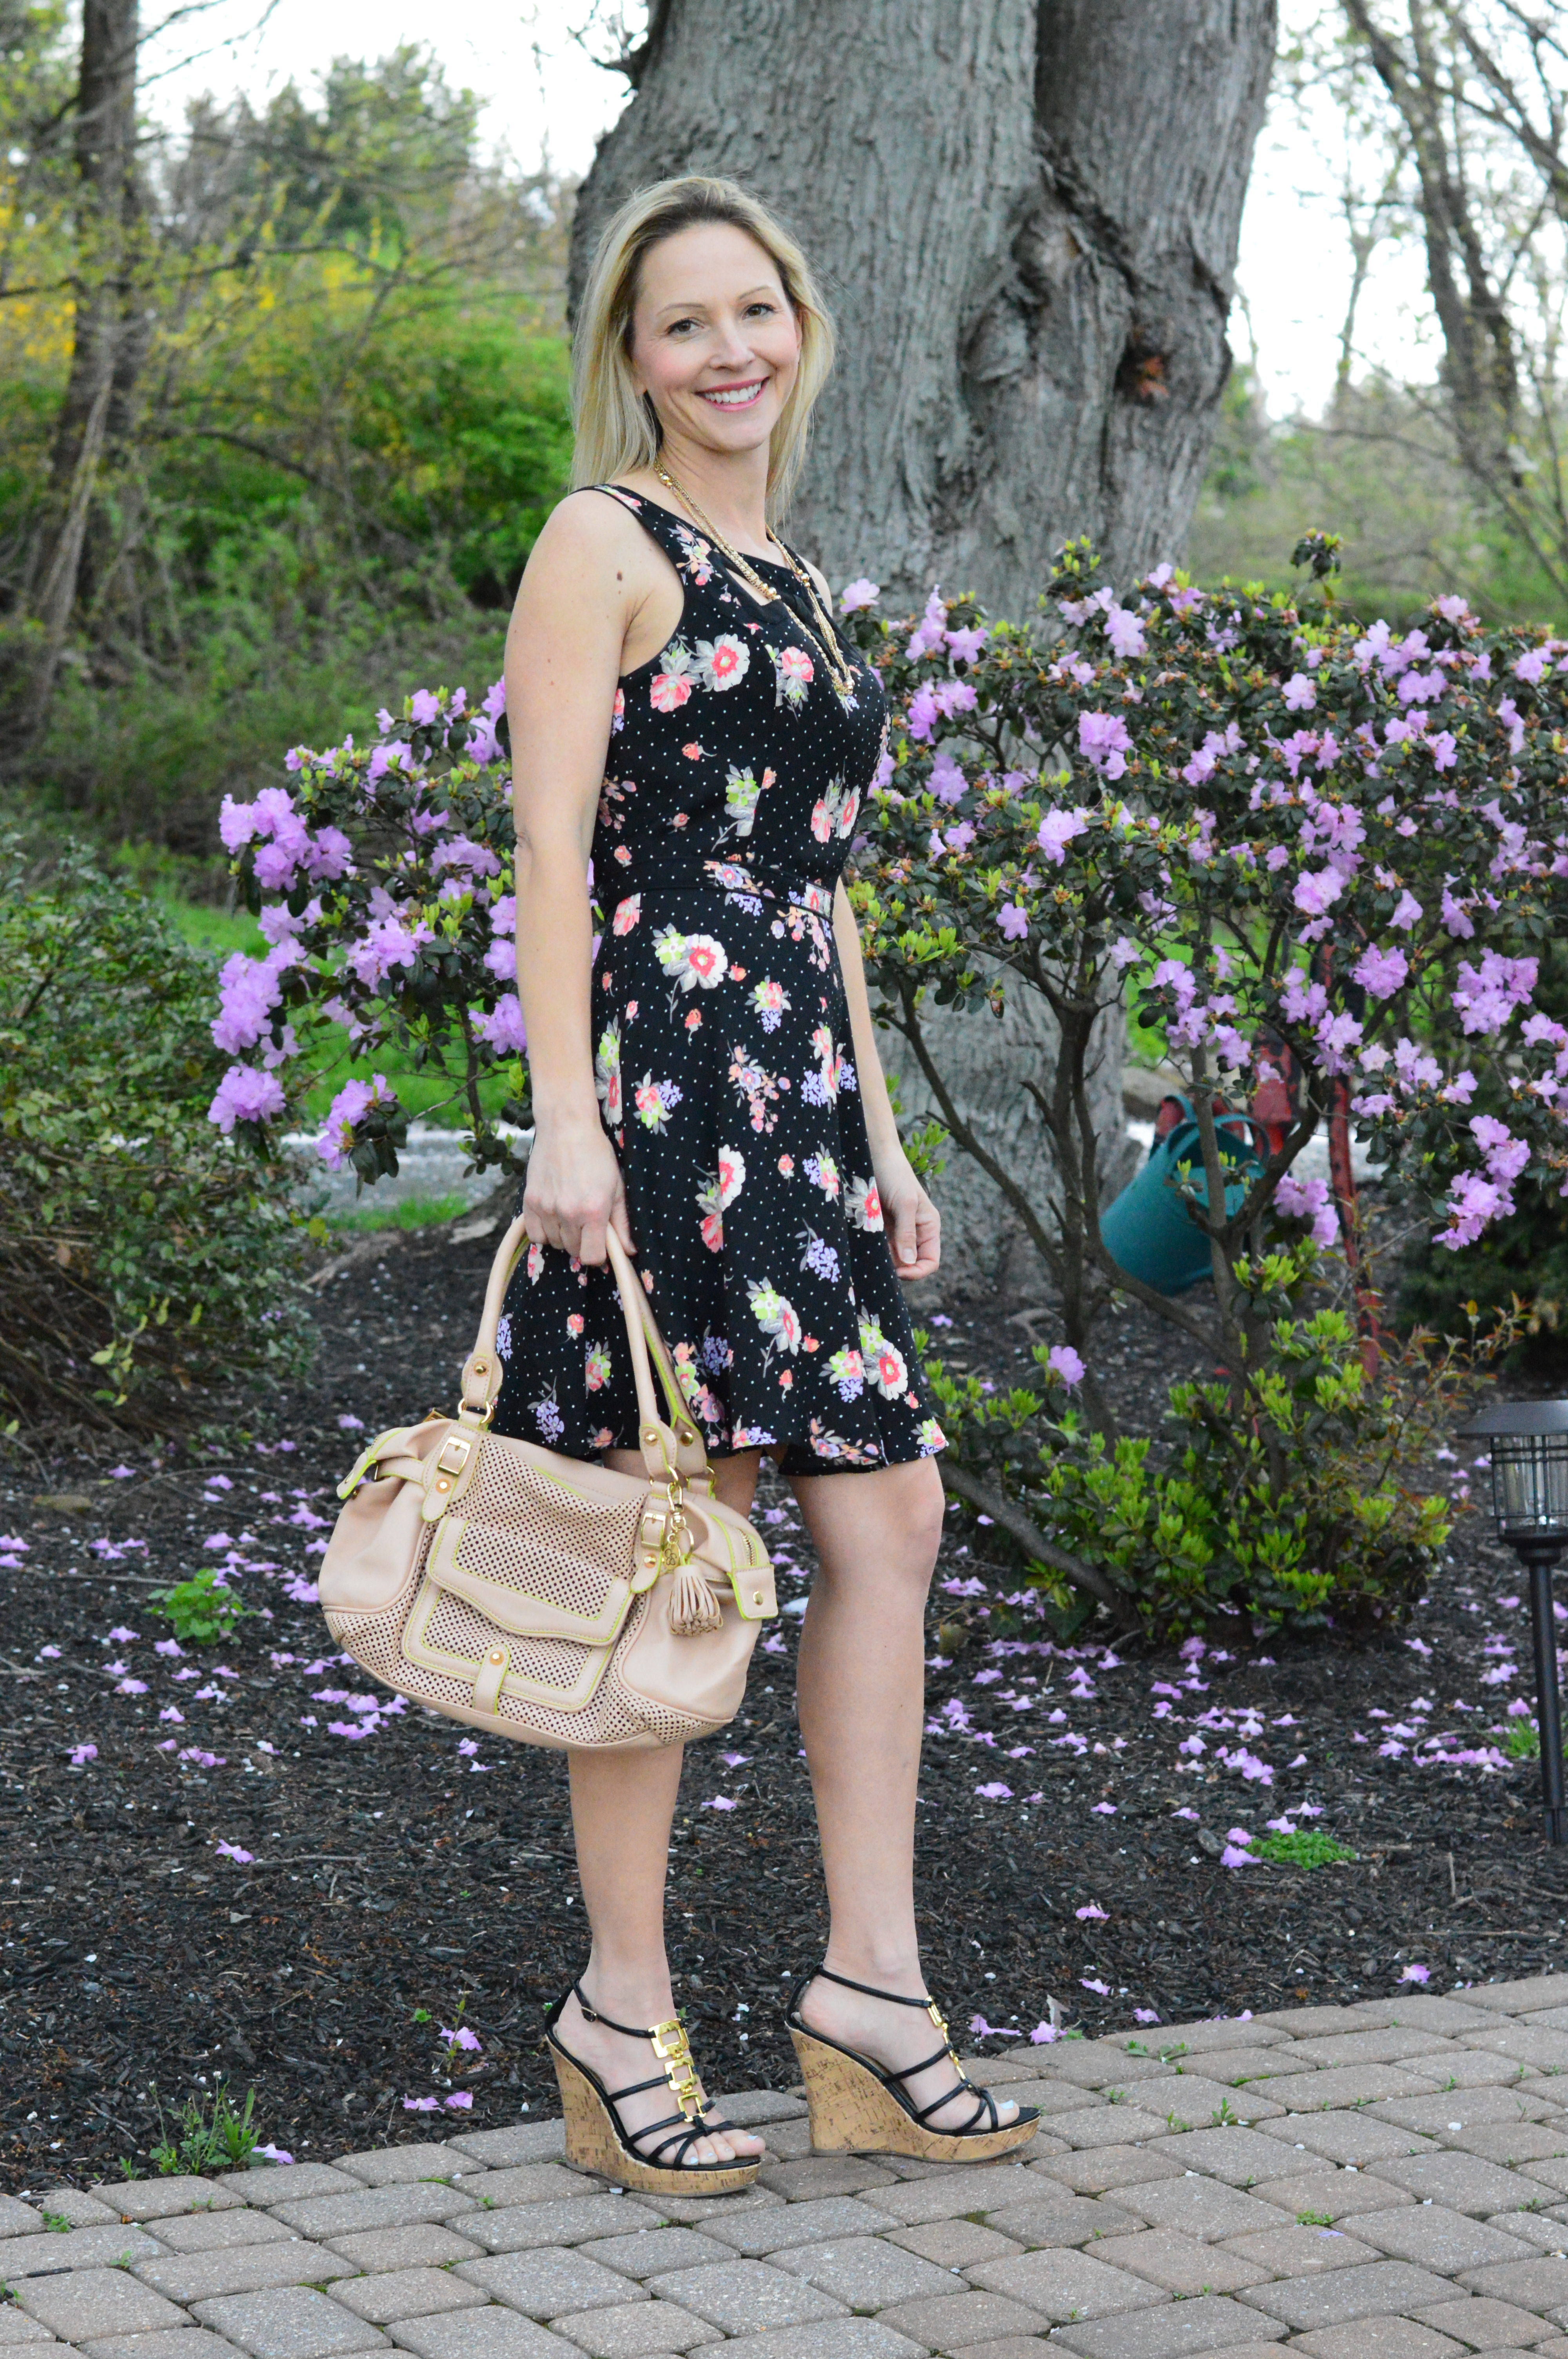 Fashion, Lauren conrad style, Outfit accessories